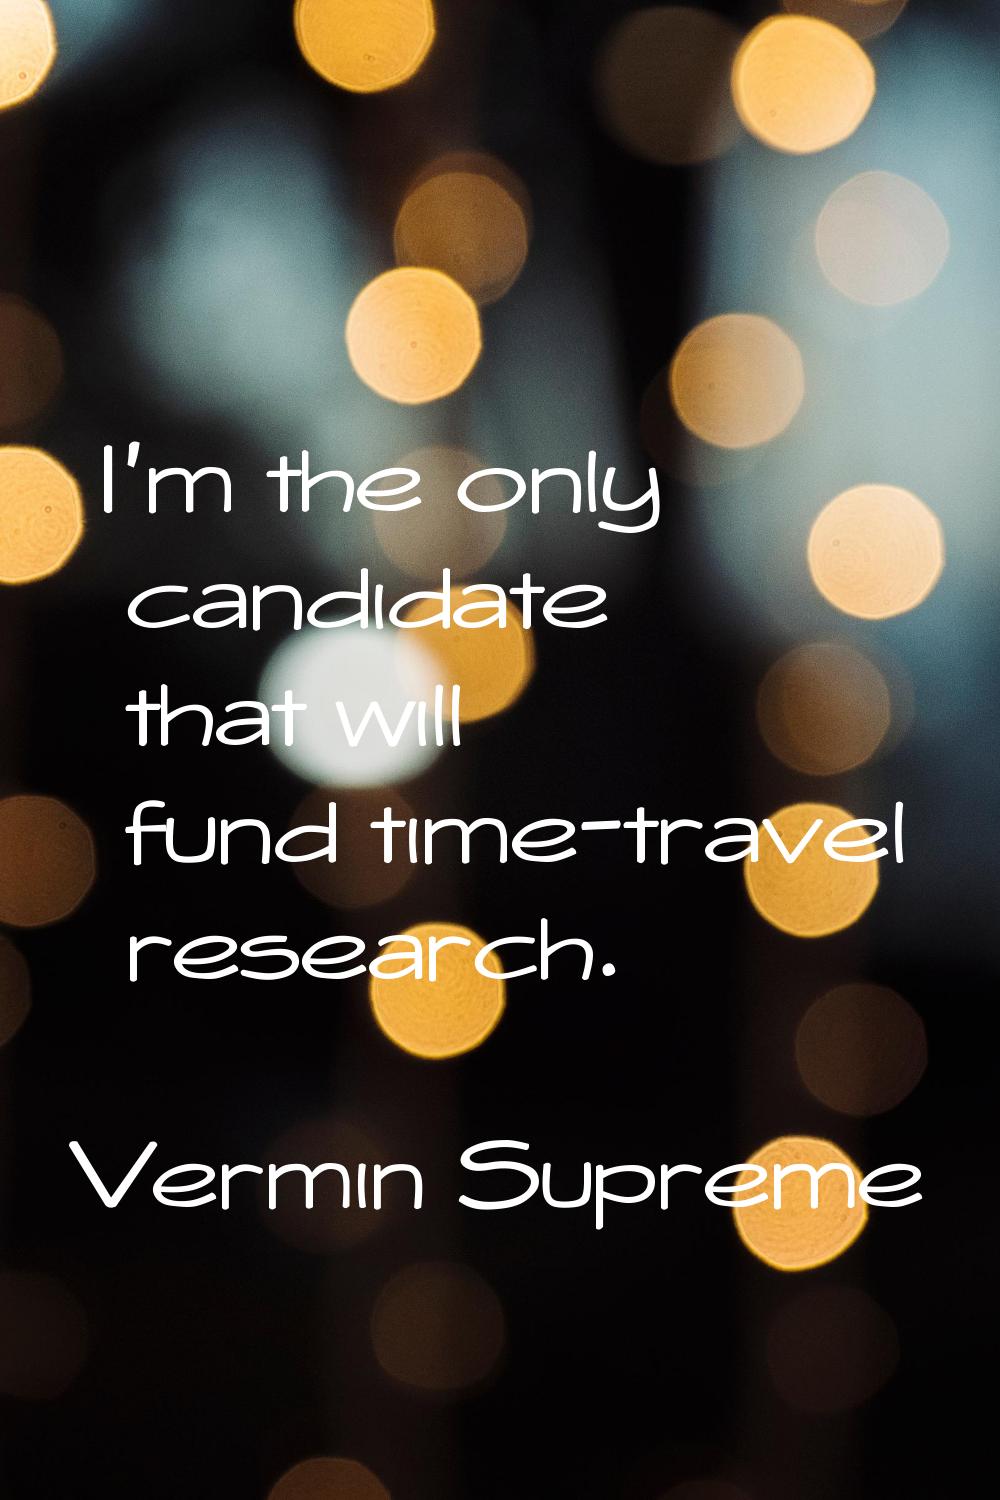 I'm the only candidate that will fund time-travel research.